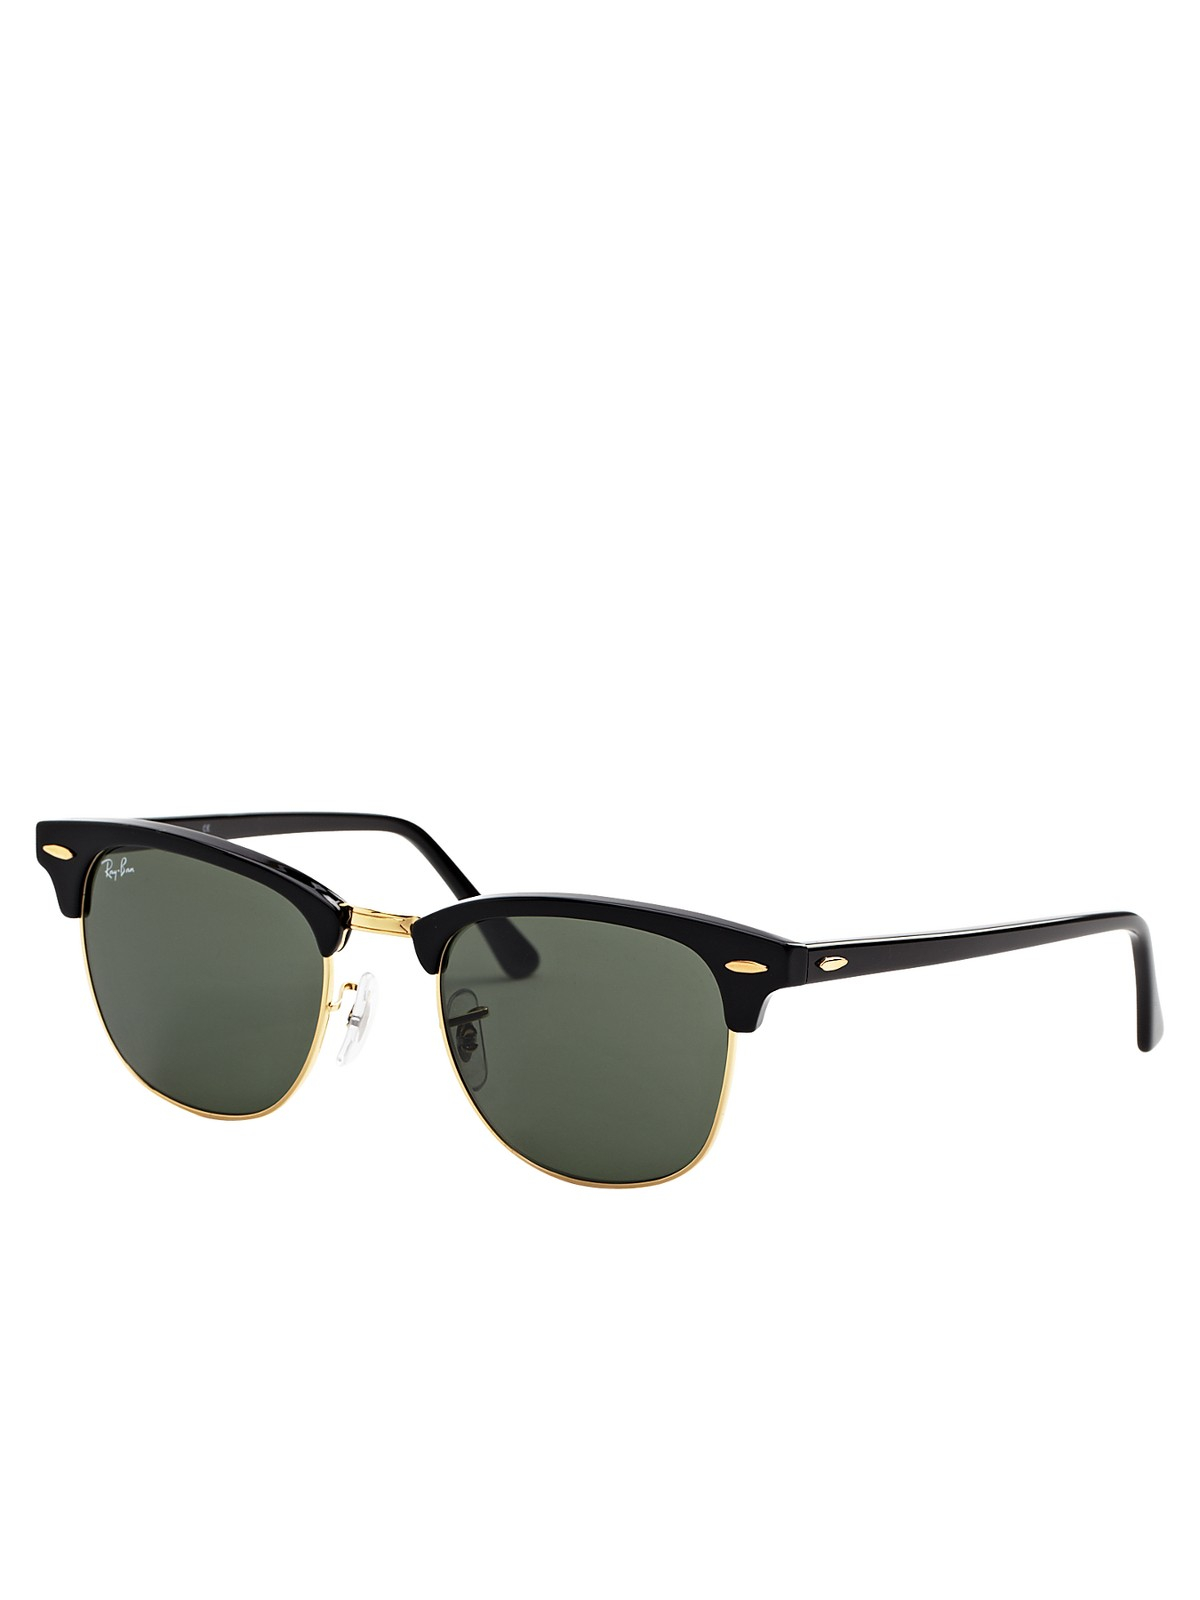 Ray-ban Rayban Clubmaster Sunglasses in Black | Lyst